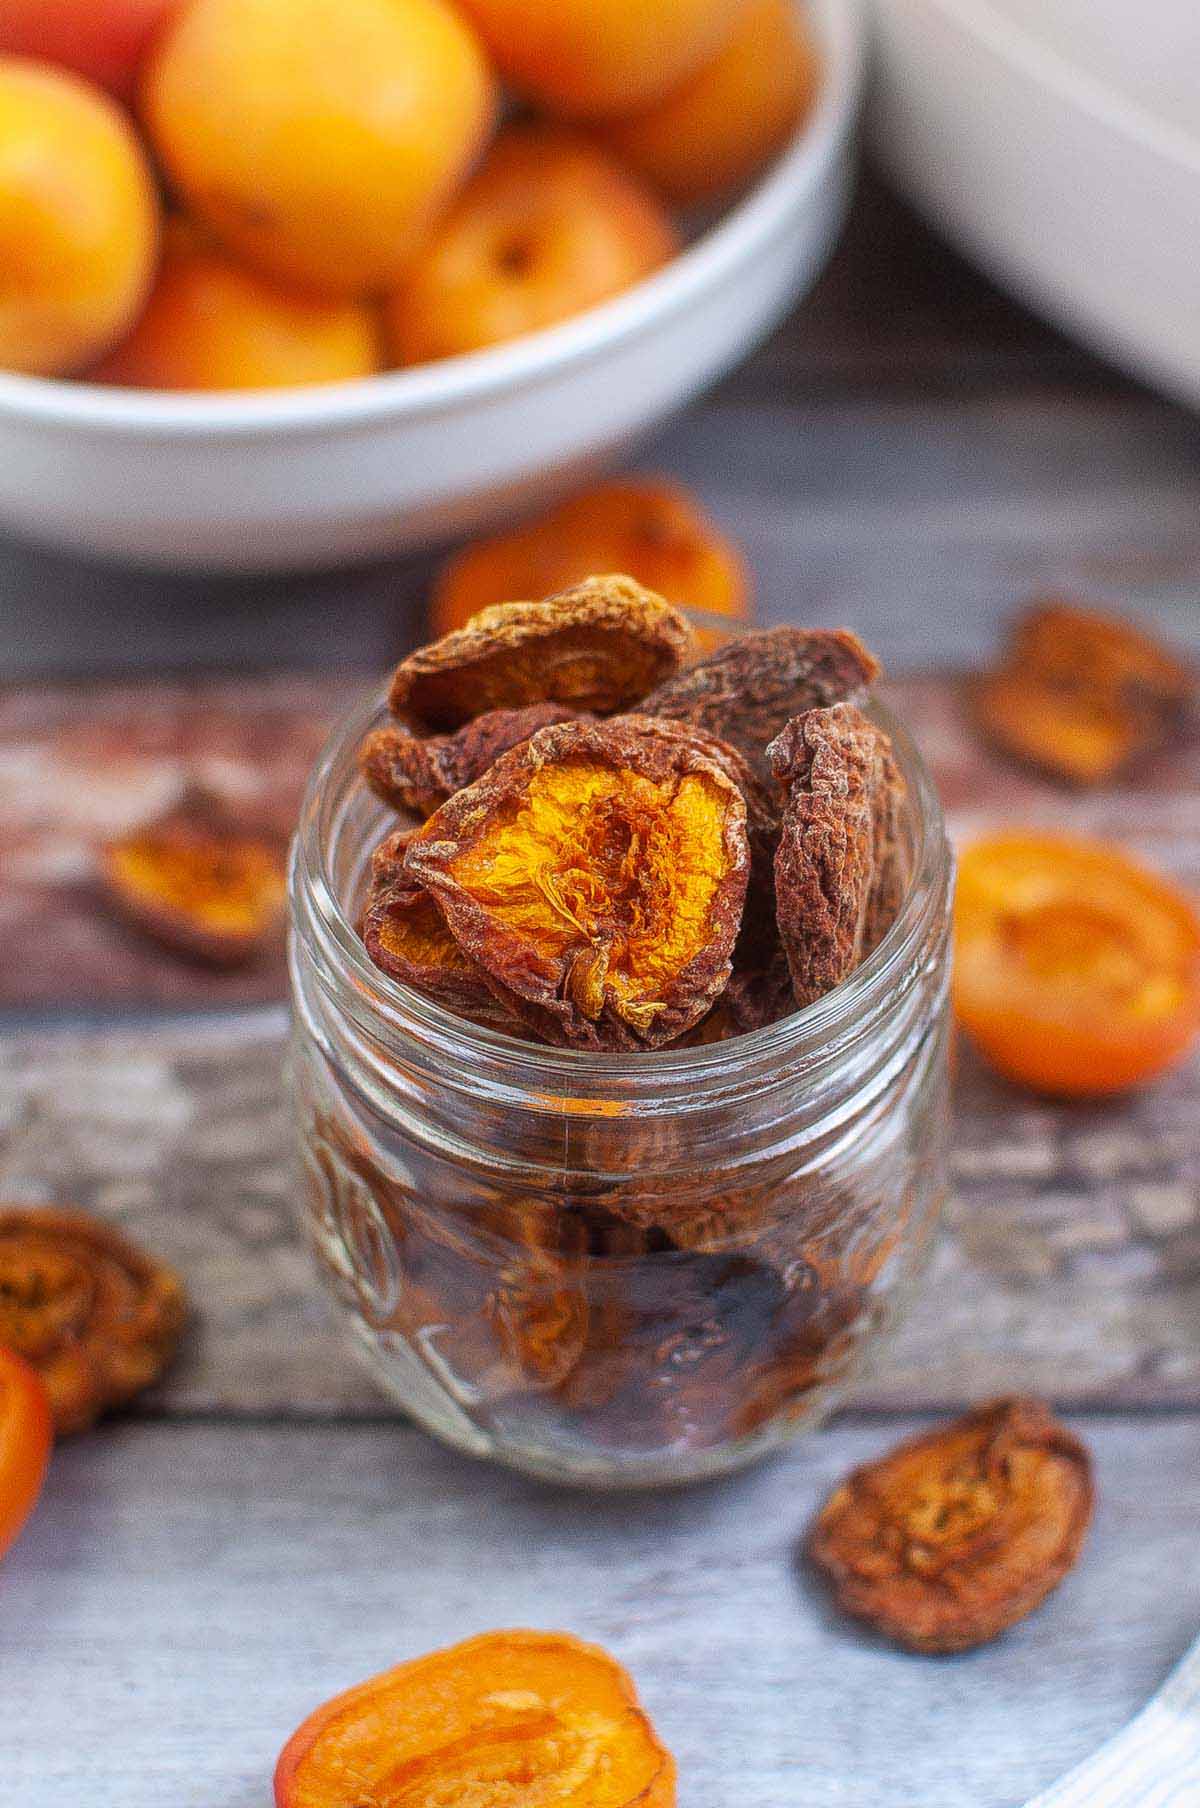 Dried apricots in a glass jar.